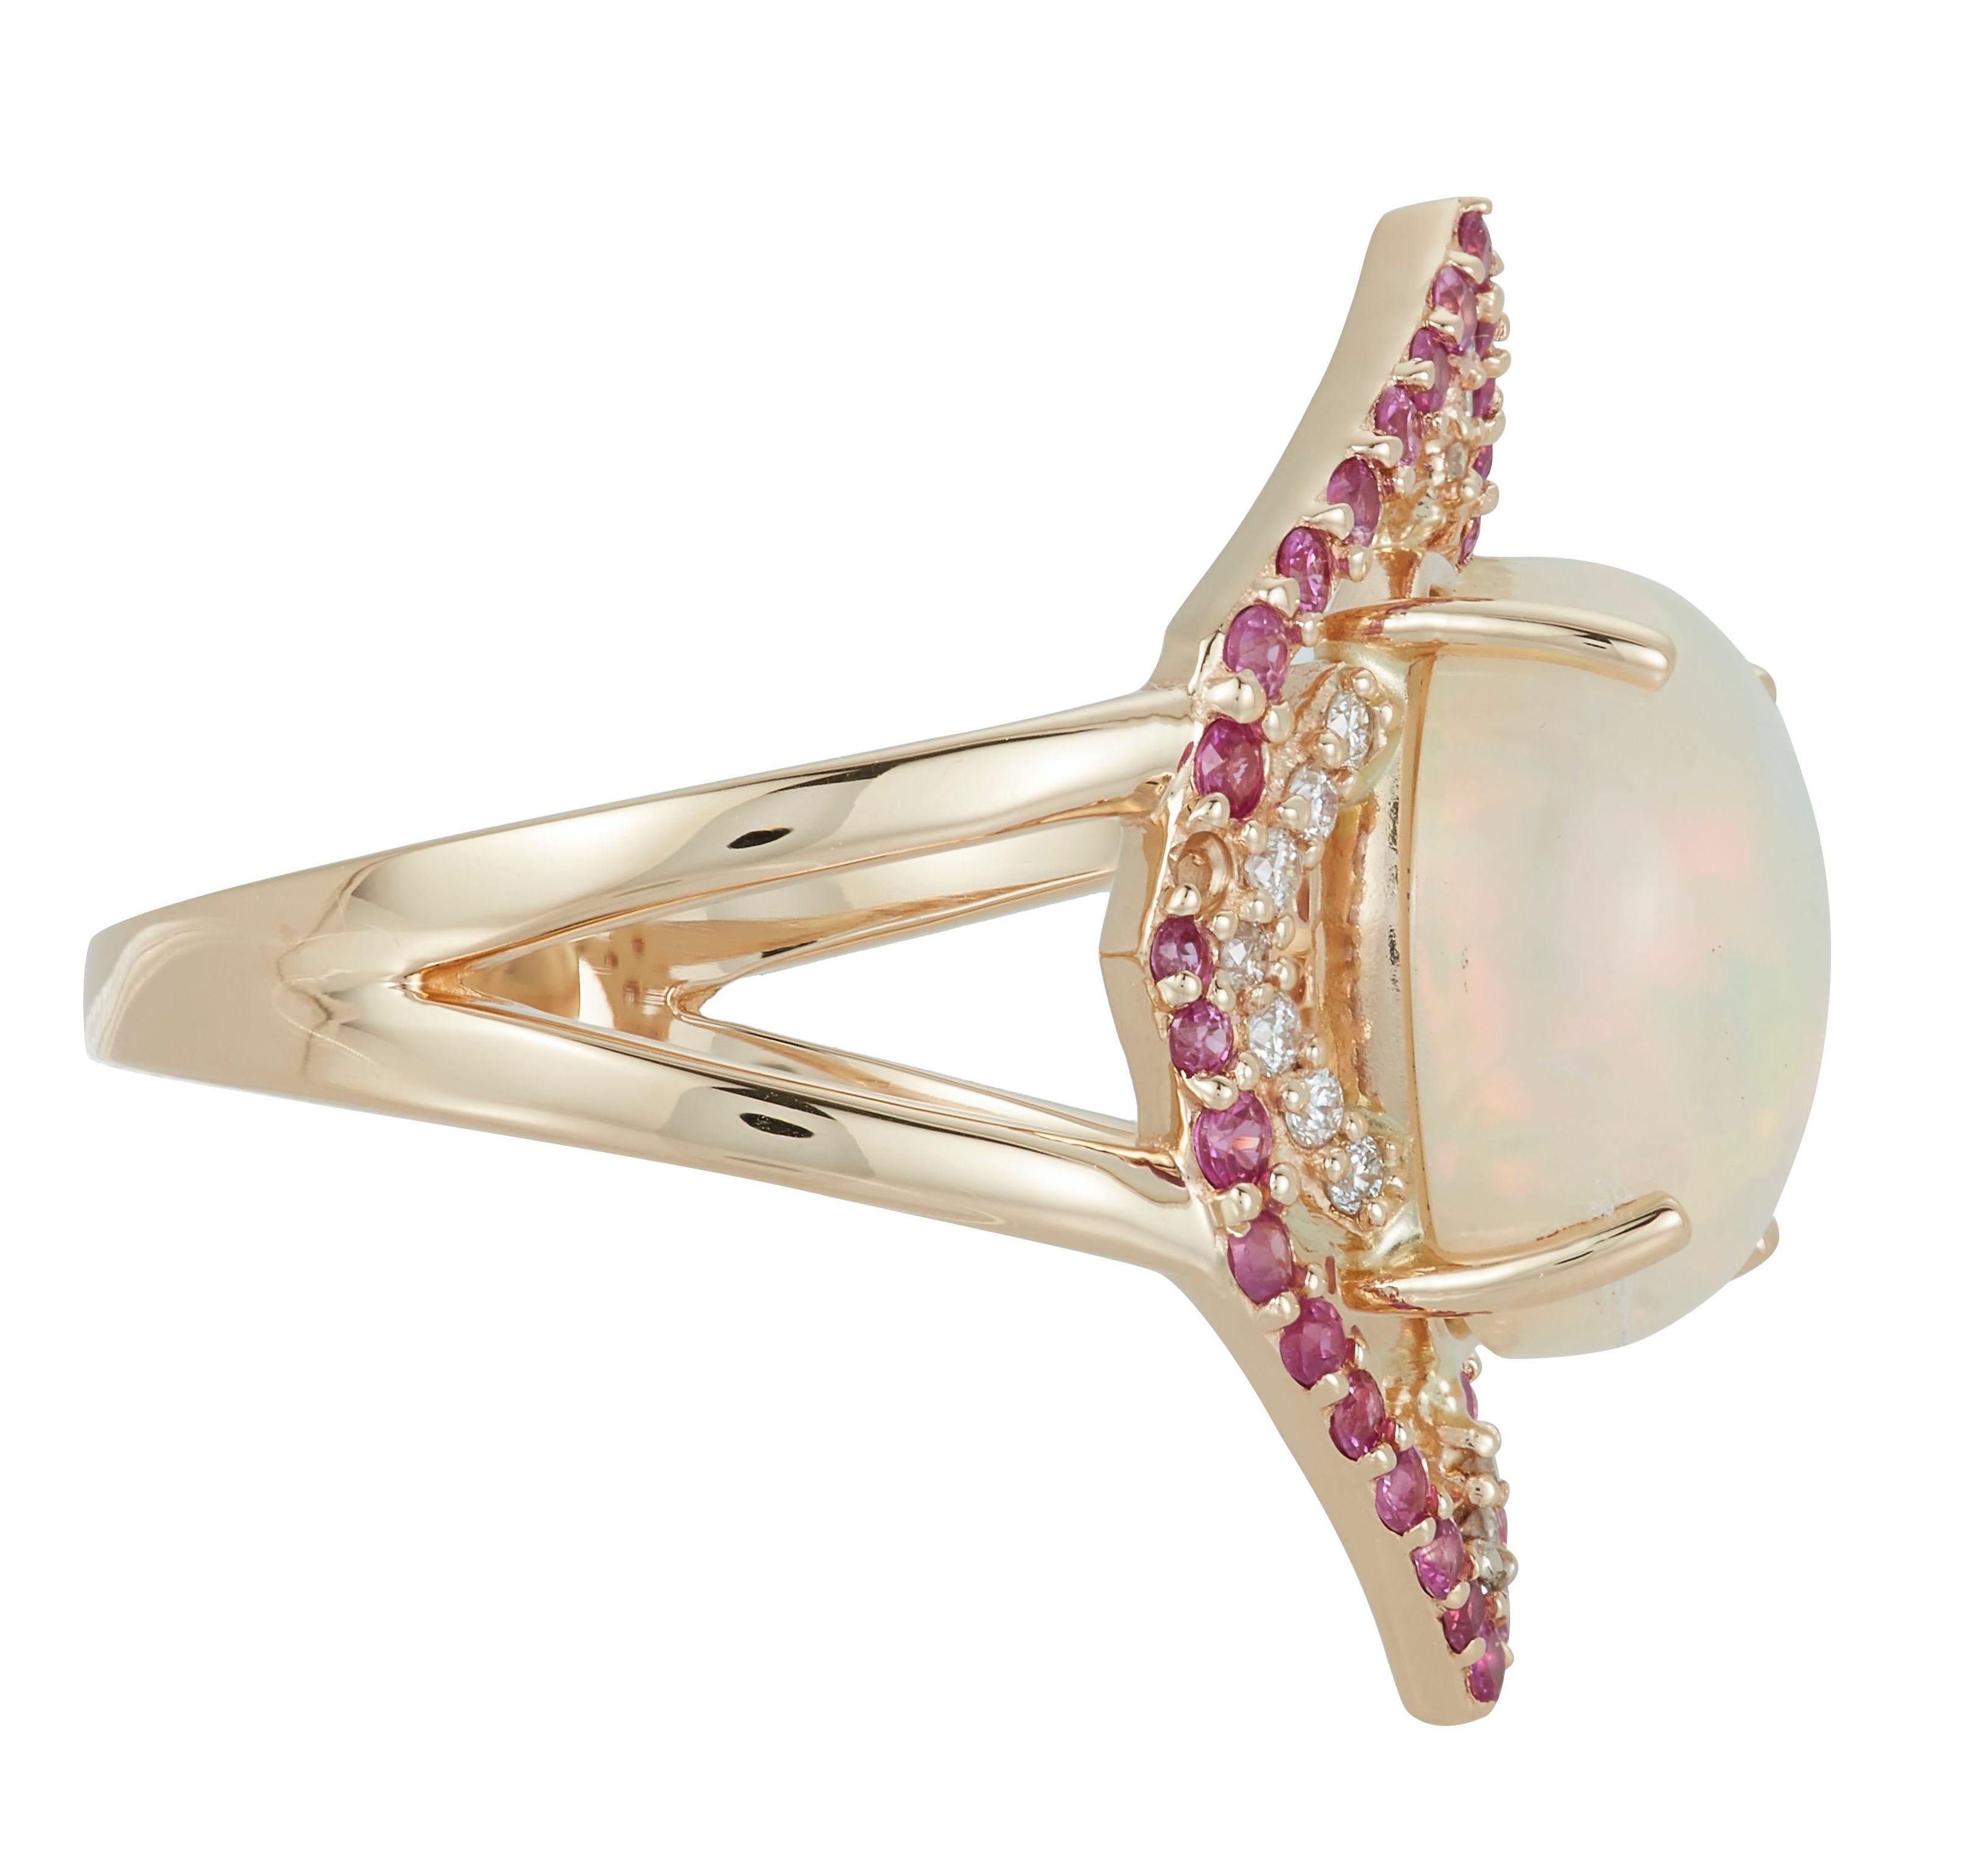 14K Yellow Gold
1 Oval Opal at 2.73 Carats- Measuring 11 x 9 mm
36 Round Pink Sapphires at 0.40 Carats
20 Round White Diamonds at 0.12 Carats - Color: H-I /Clarity: SI

Alberto offers complimentary sizing on all rings. 

Fine one-of-a-kind